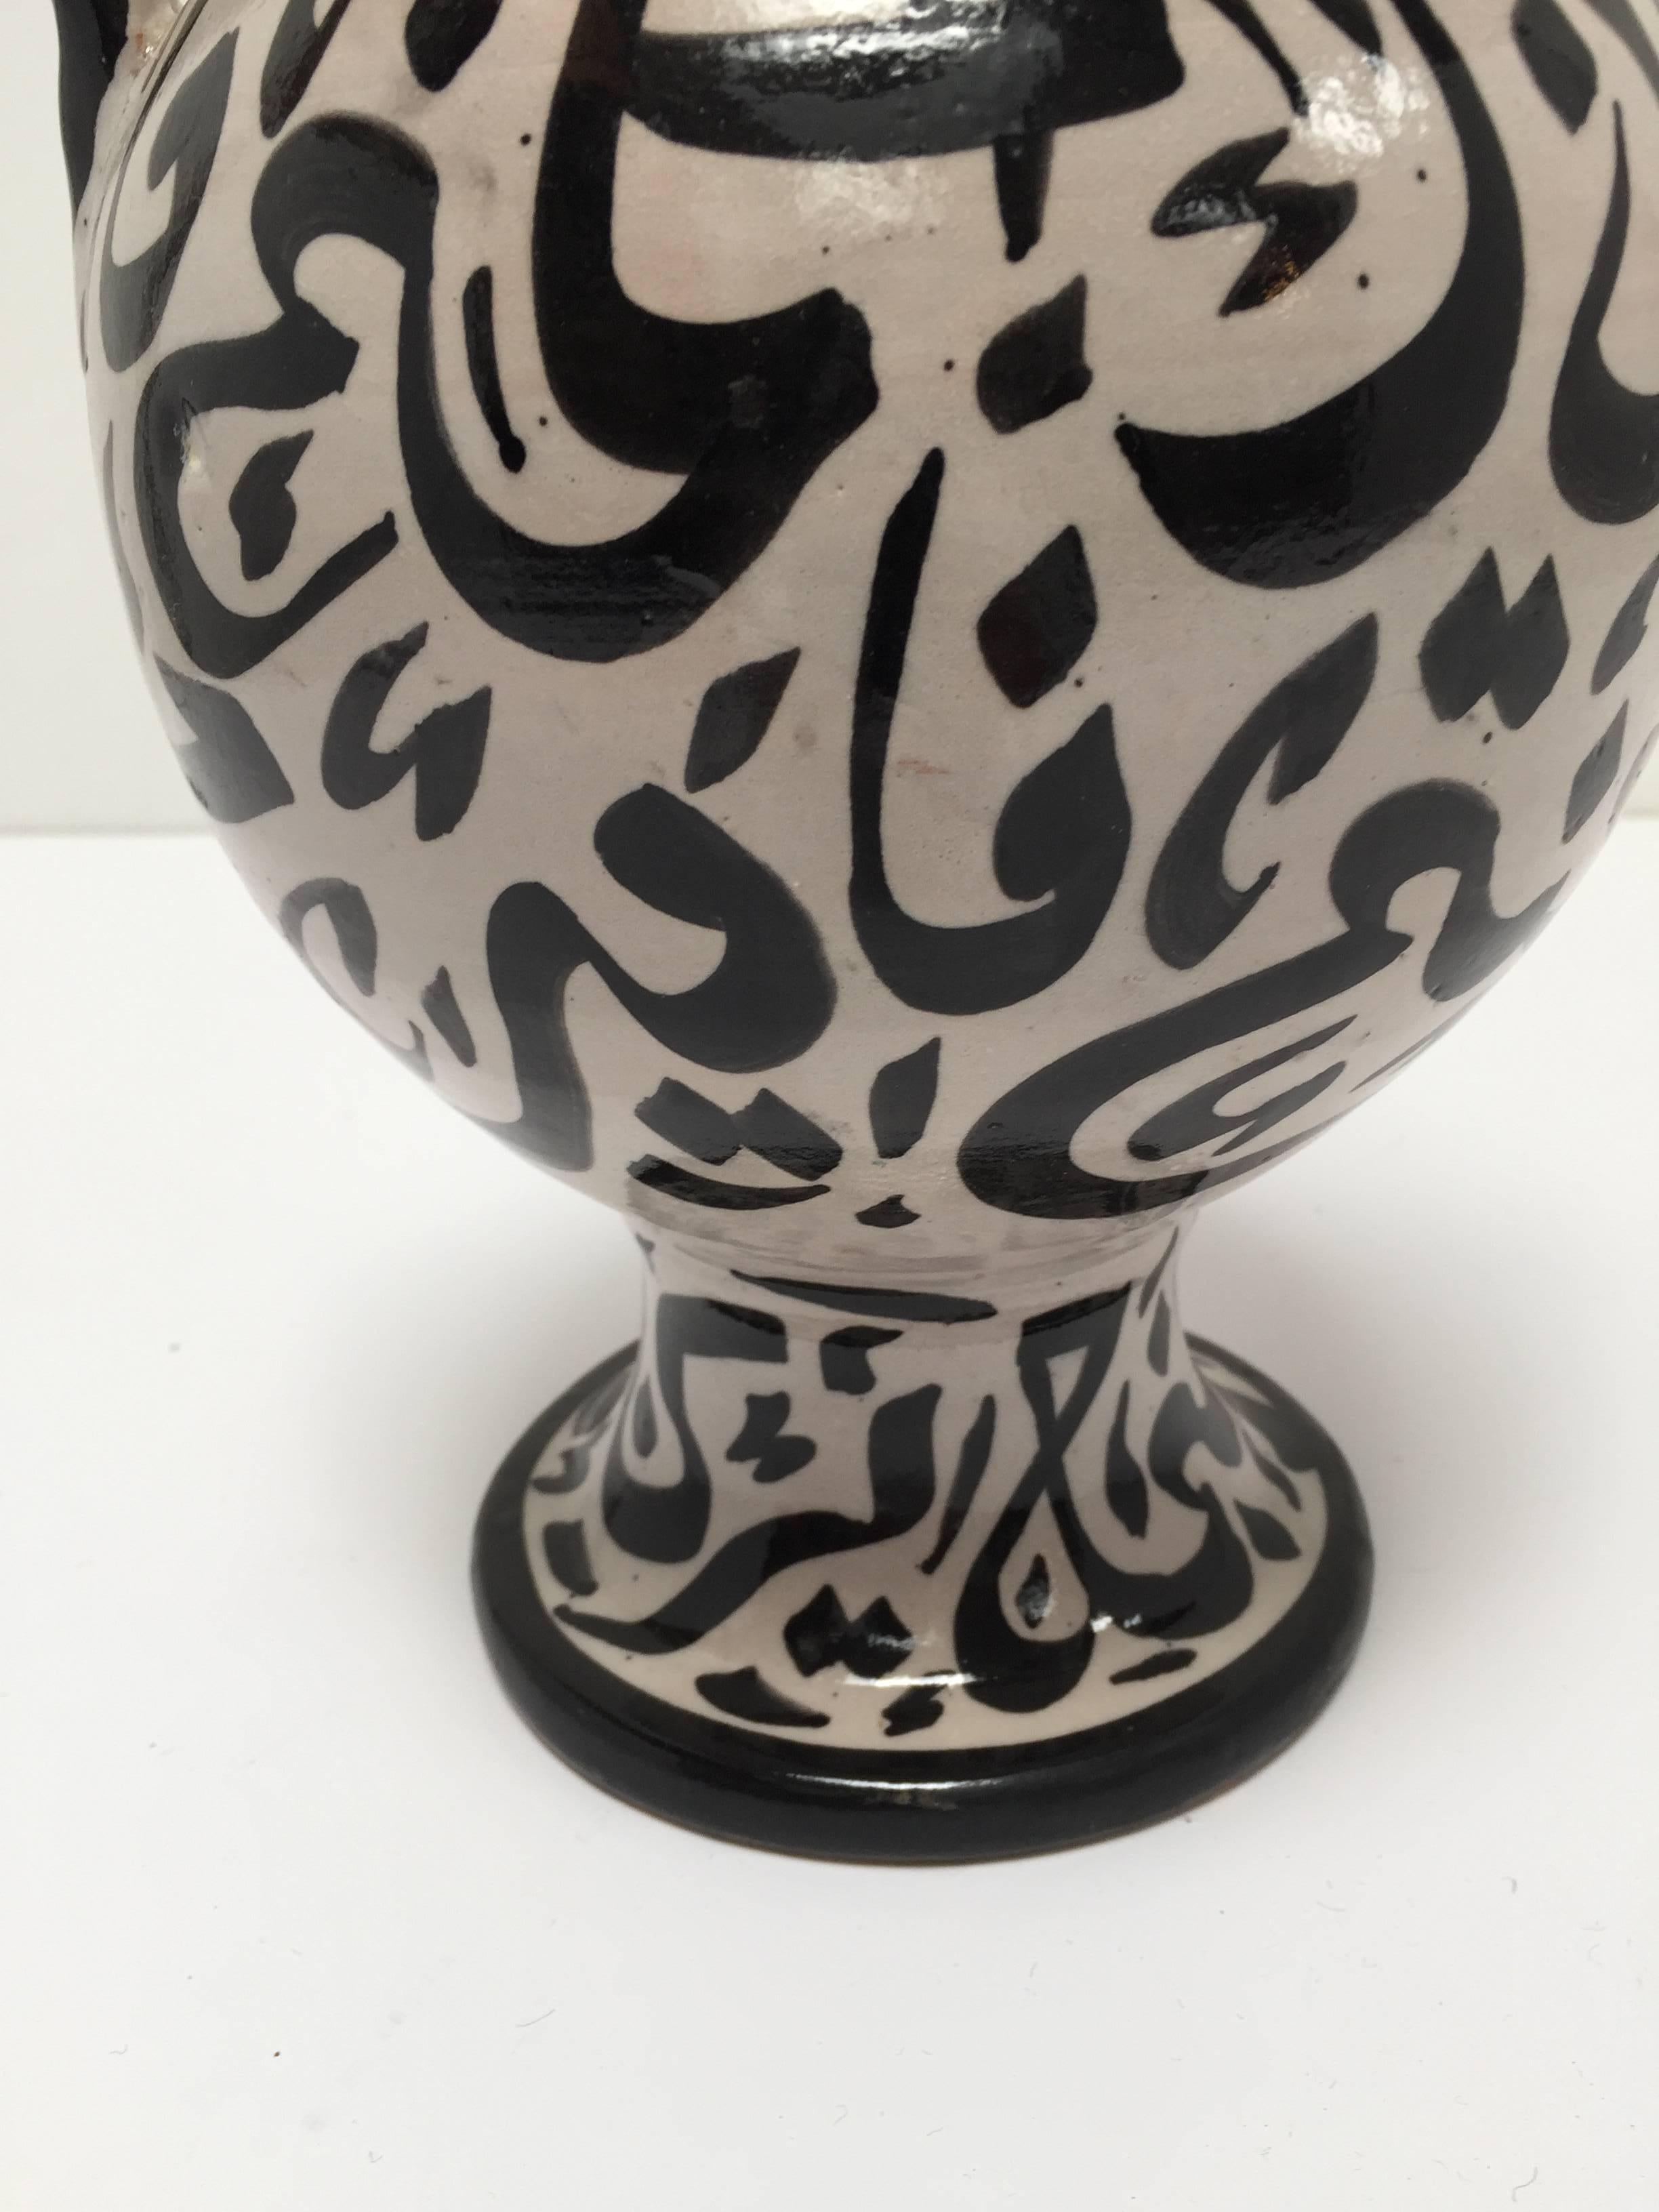 Moroccan glazed ceramic vase with handles from Fez. 
Moorish style ceramic handcrafted and hand painted in Fez with Arabic calligraphy writing design in black on ivory background.
This kind of Art Writing looks calligraphic is called Lettrism, it is